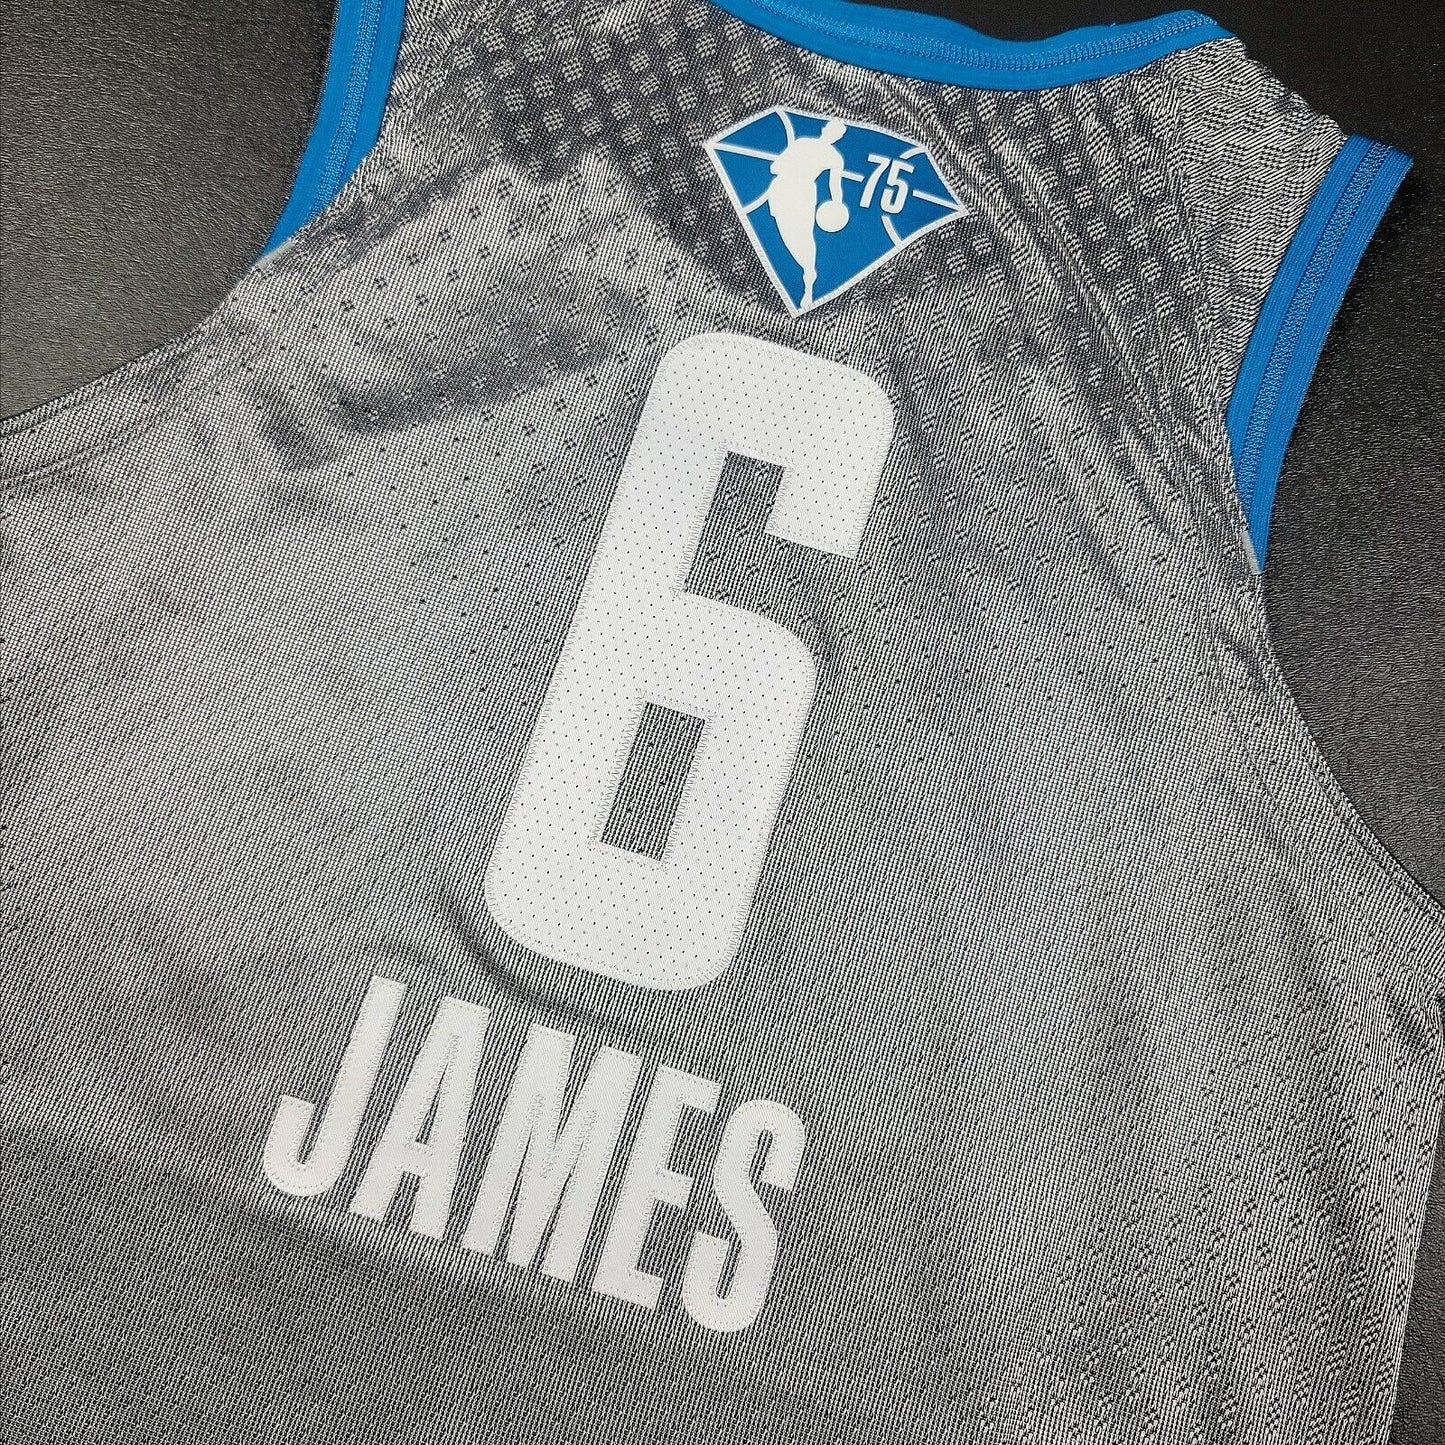 100% Authentic Lebron James 2022 NBA All Star Game Team Captain Jersey Size 44 M